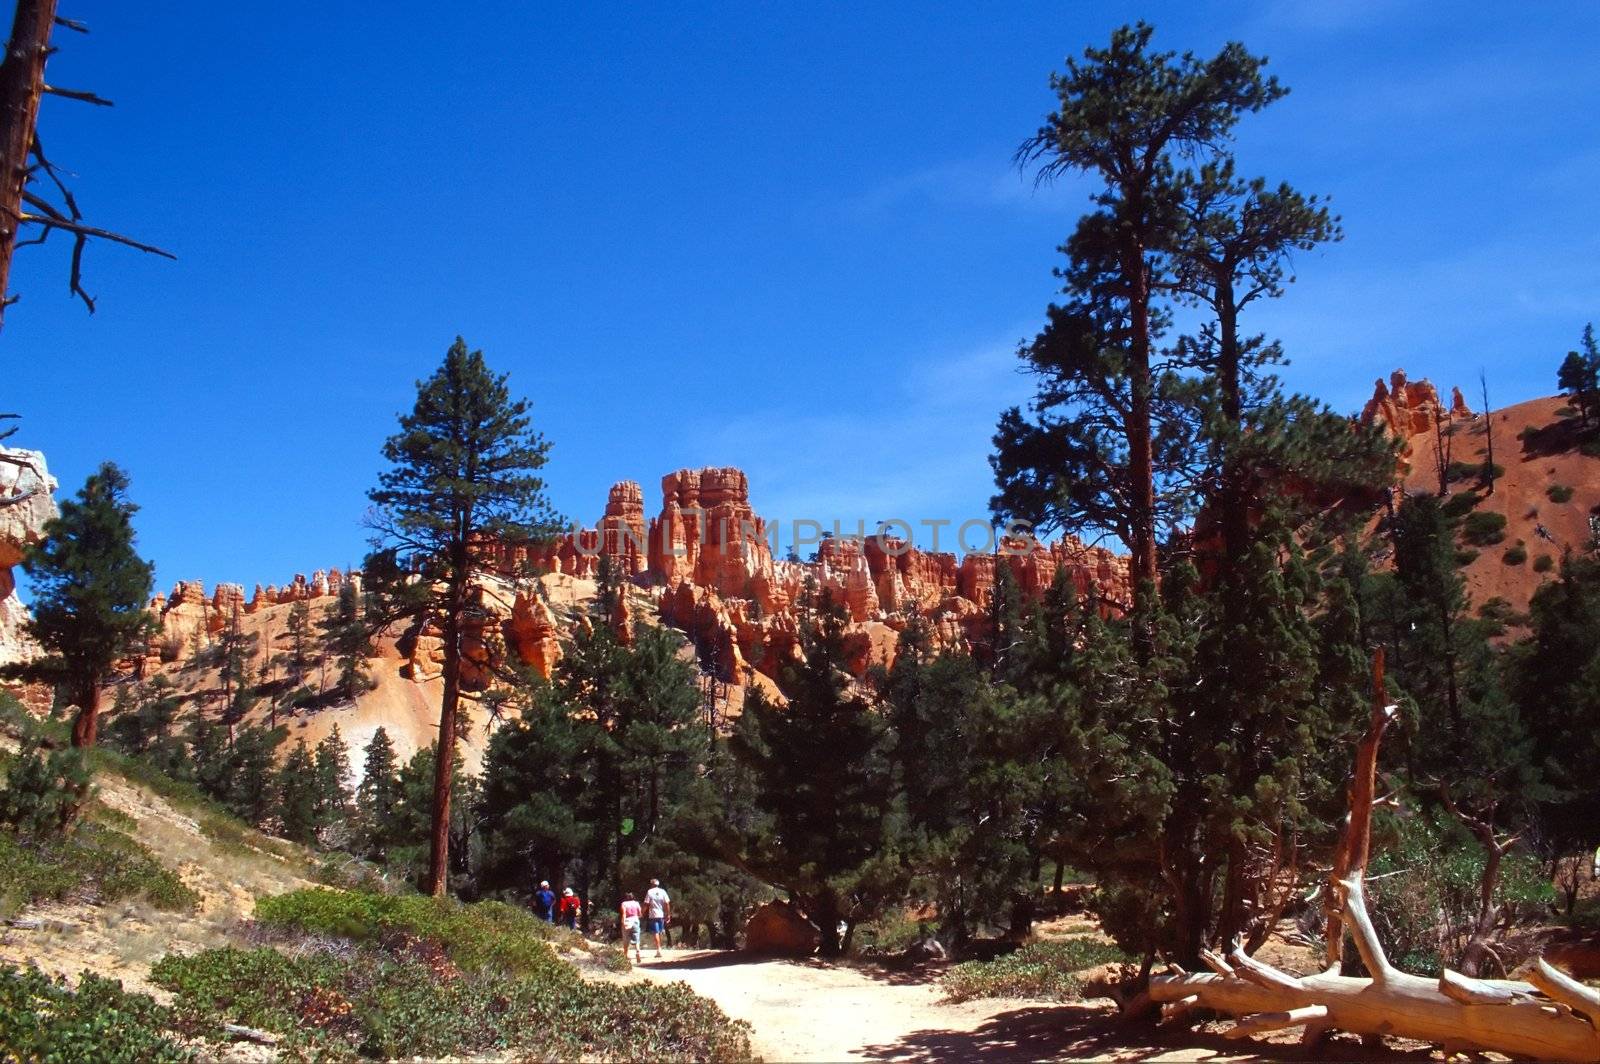 Bryce Canyon National Park is a national park located in southwestern Utah in the United States. Contained within the park is Bryce Canyon. Despite its name, this is not actually a canyon, but rather a giant natural amphitheater created by erosion along the eastern side of the Paunsaugunt Plateau. Bryce is distinctive due to its geological structures, called hoodoos, formed from wind, water, and ice erosion of the river and lakebed sedimentary rocks. The red, orange and white colors of the rocks provide spectacular views to visitors.